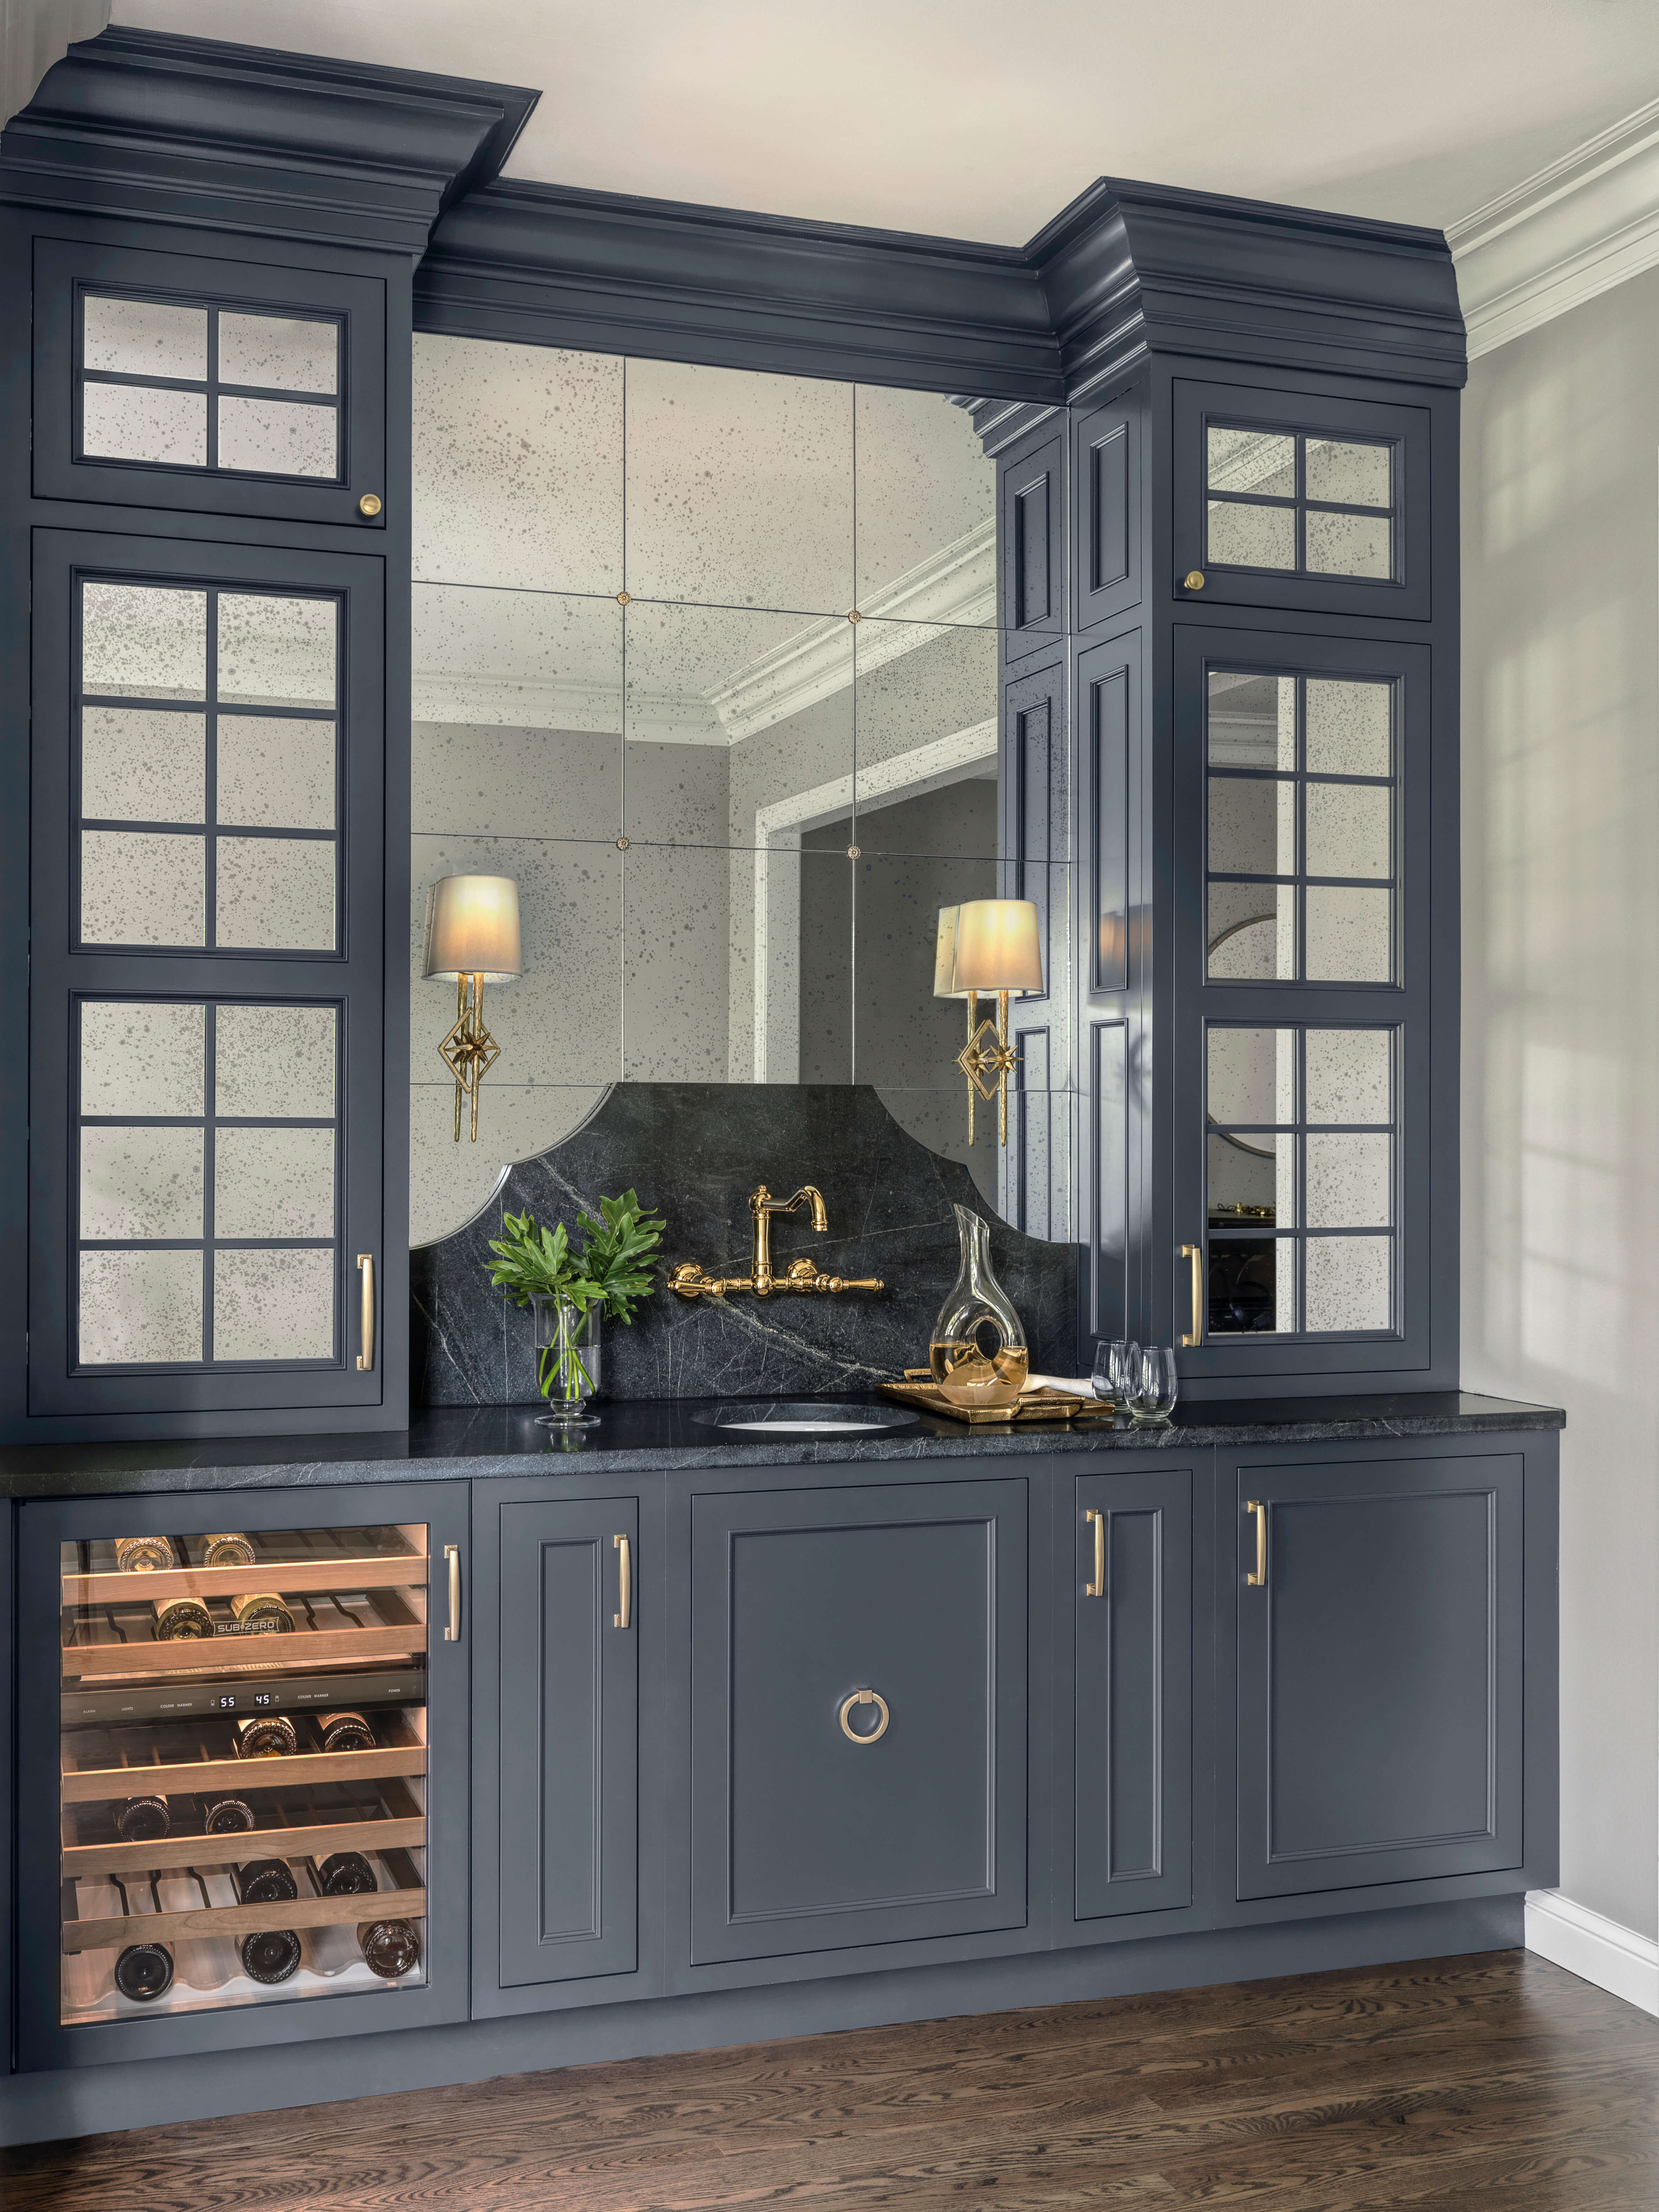 A dark navy blue (almost black) painted cabinet nook in a dining room uses mirror instead of glass for the accent cabinet doors.